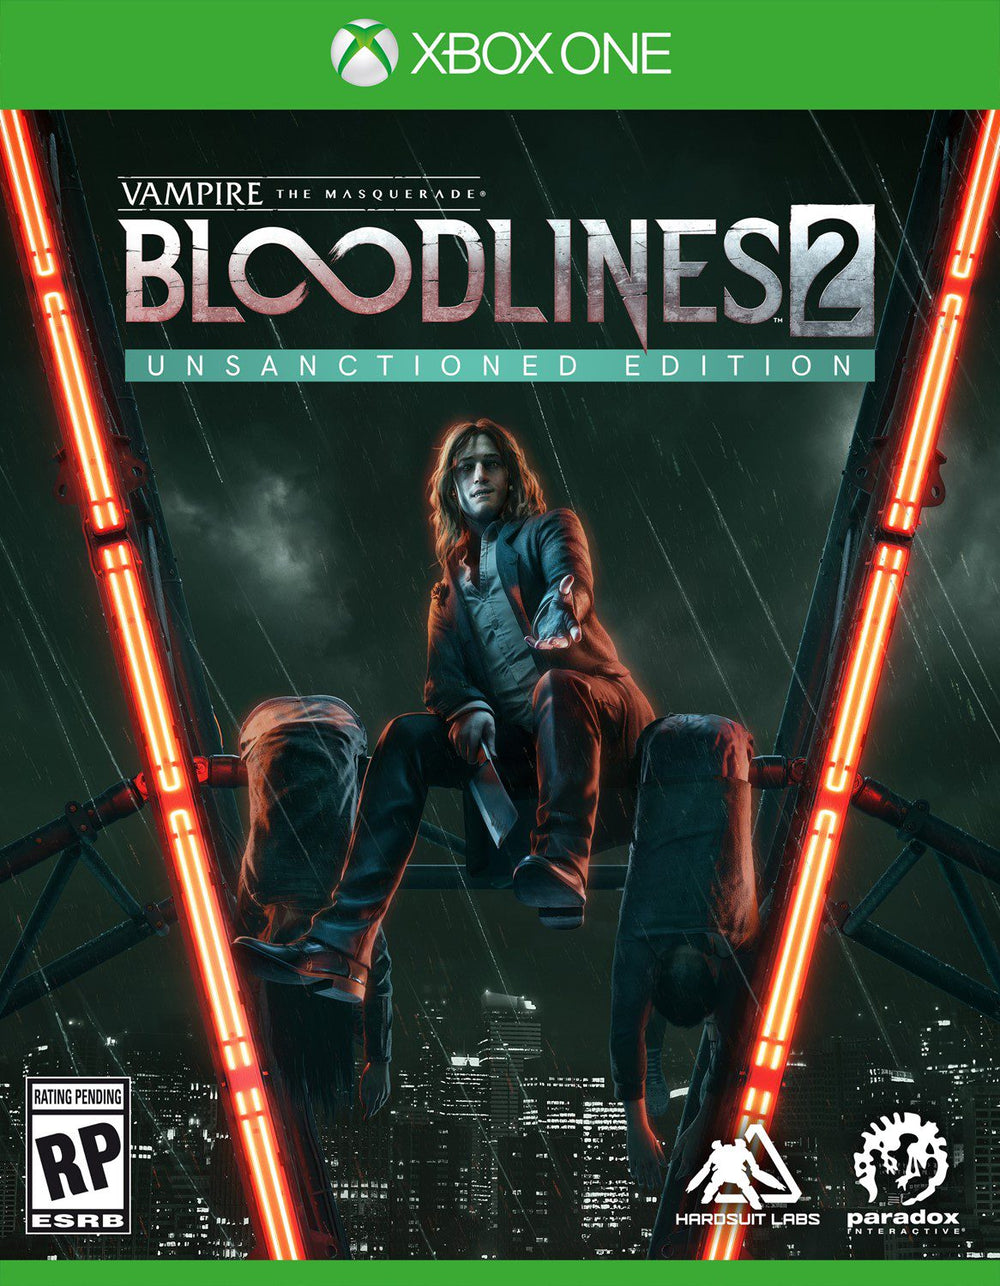 Vampire: The Masquerade - Bloodlines 2 (Unsanctioned Edition) [XB1]